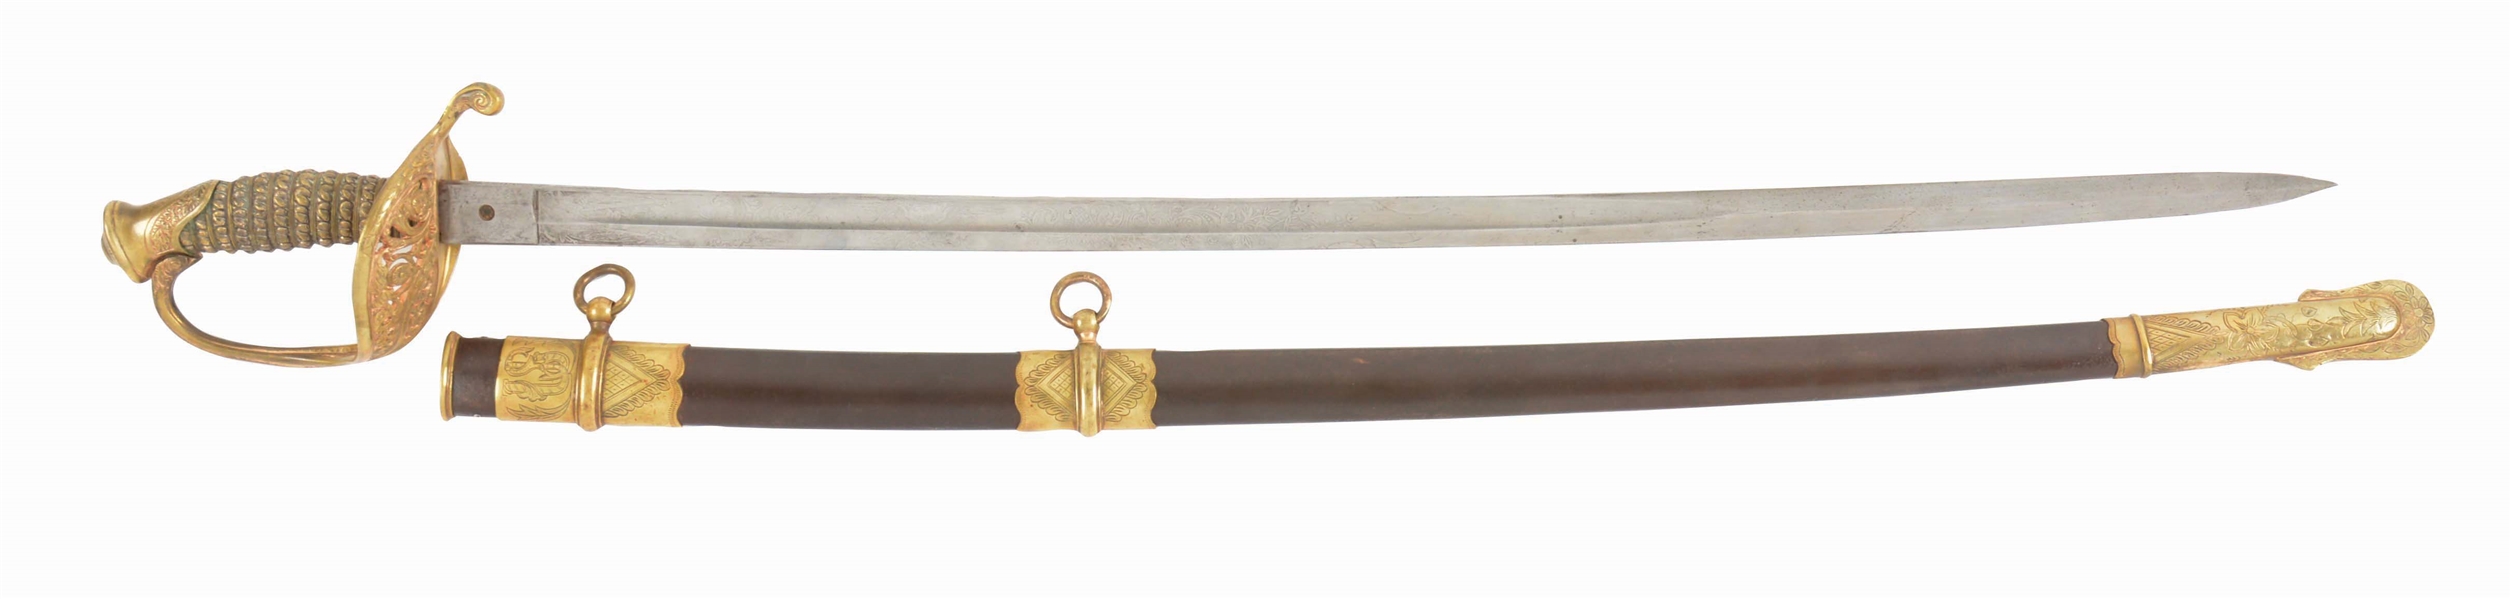 1850 FOOT OFFICER SWORD WITH METAL SCABBARD.